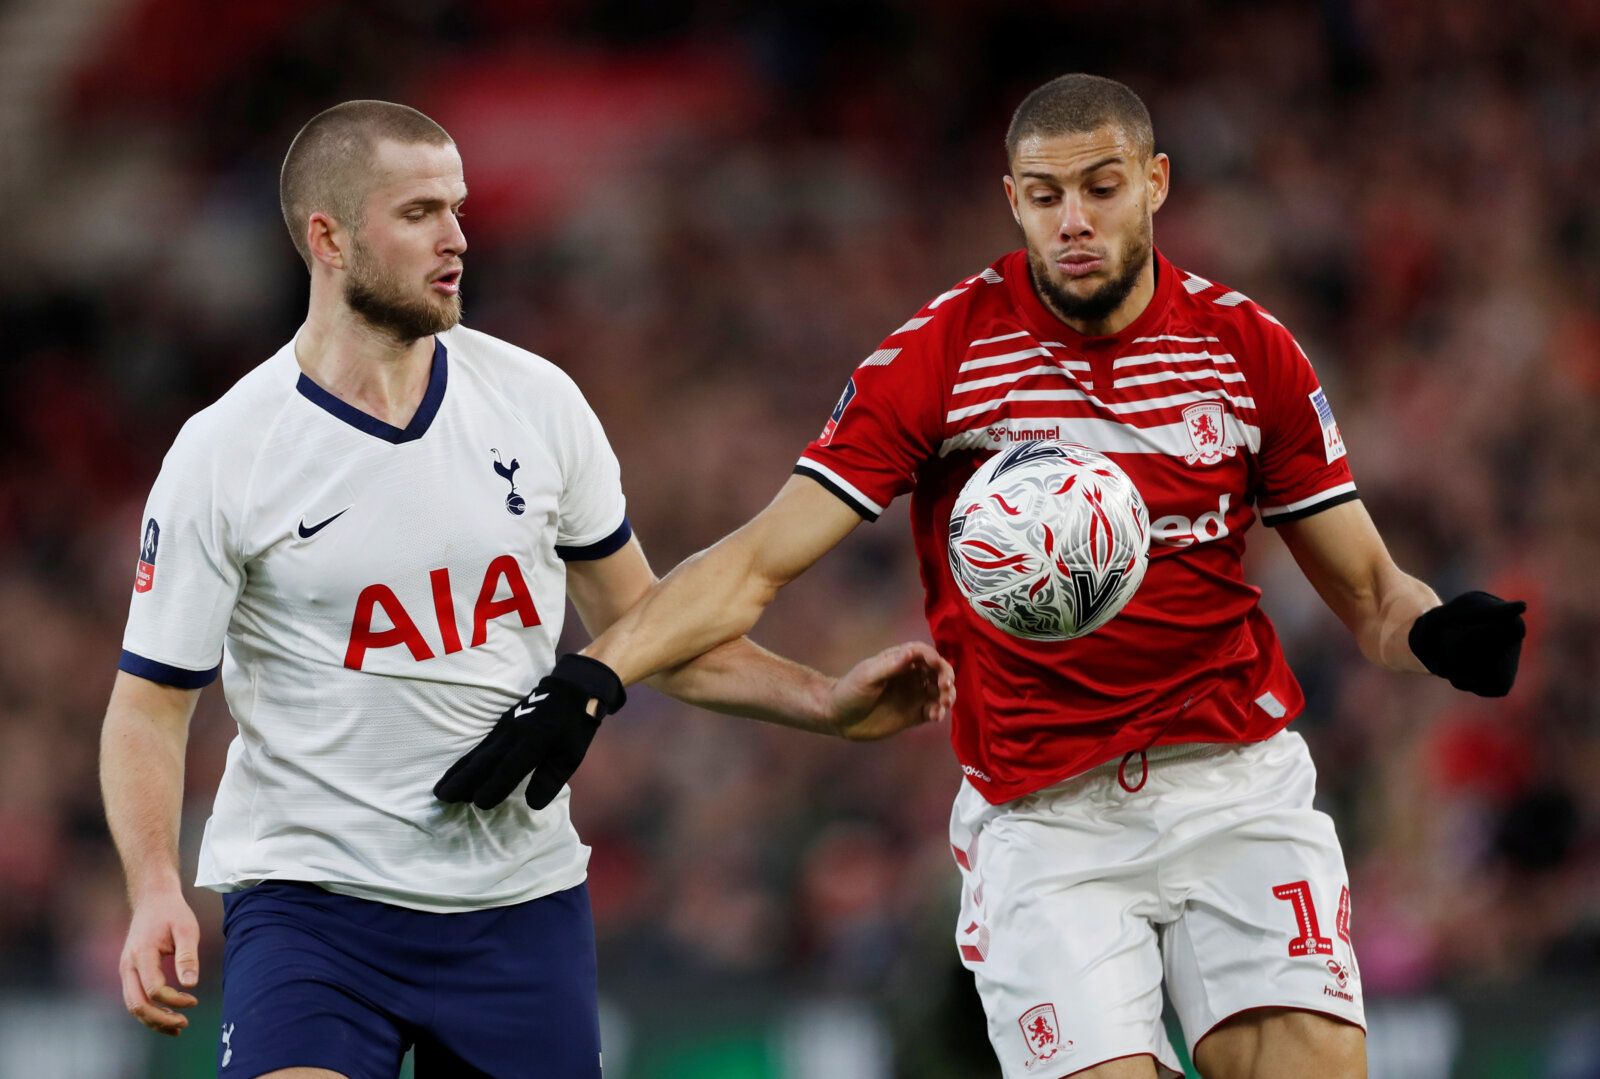 Soccer Football - FA Cup - Third Round - Middlesbrough v Tottenham Hotspur - Riverside Stadium, Middlesbrough, Britain - January 5, 2020  Middlesbrough's Rudy Gestede in action with Tottenham Hotspur's Eric Dier   Action Images via Reuters/Lee Smith